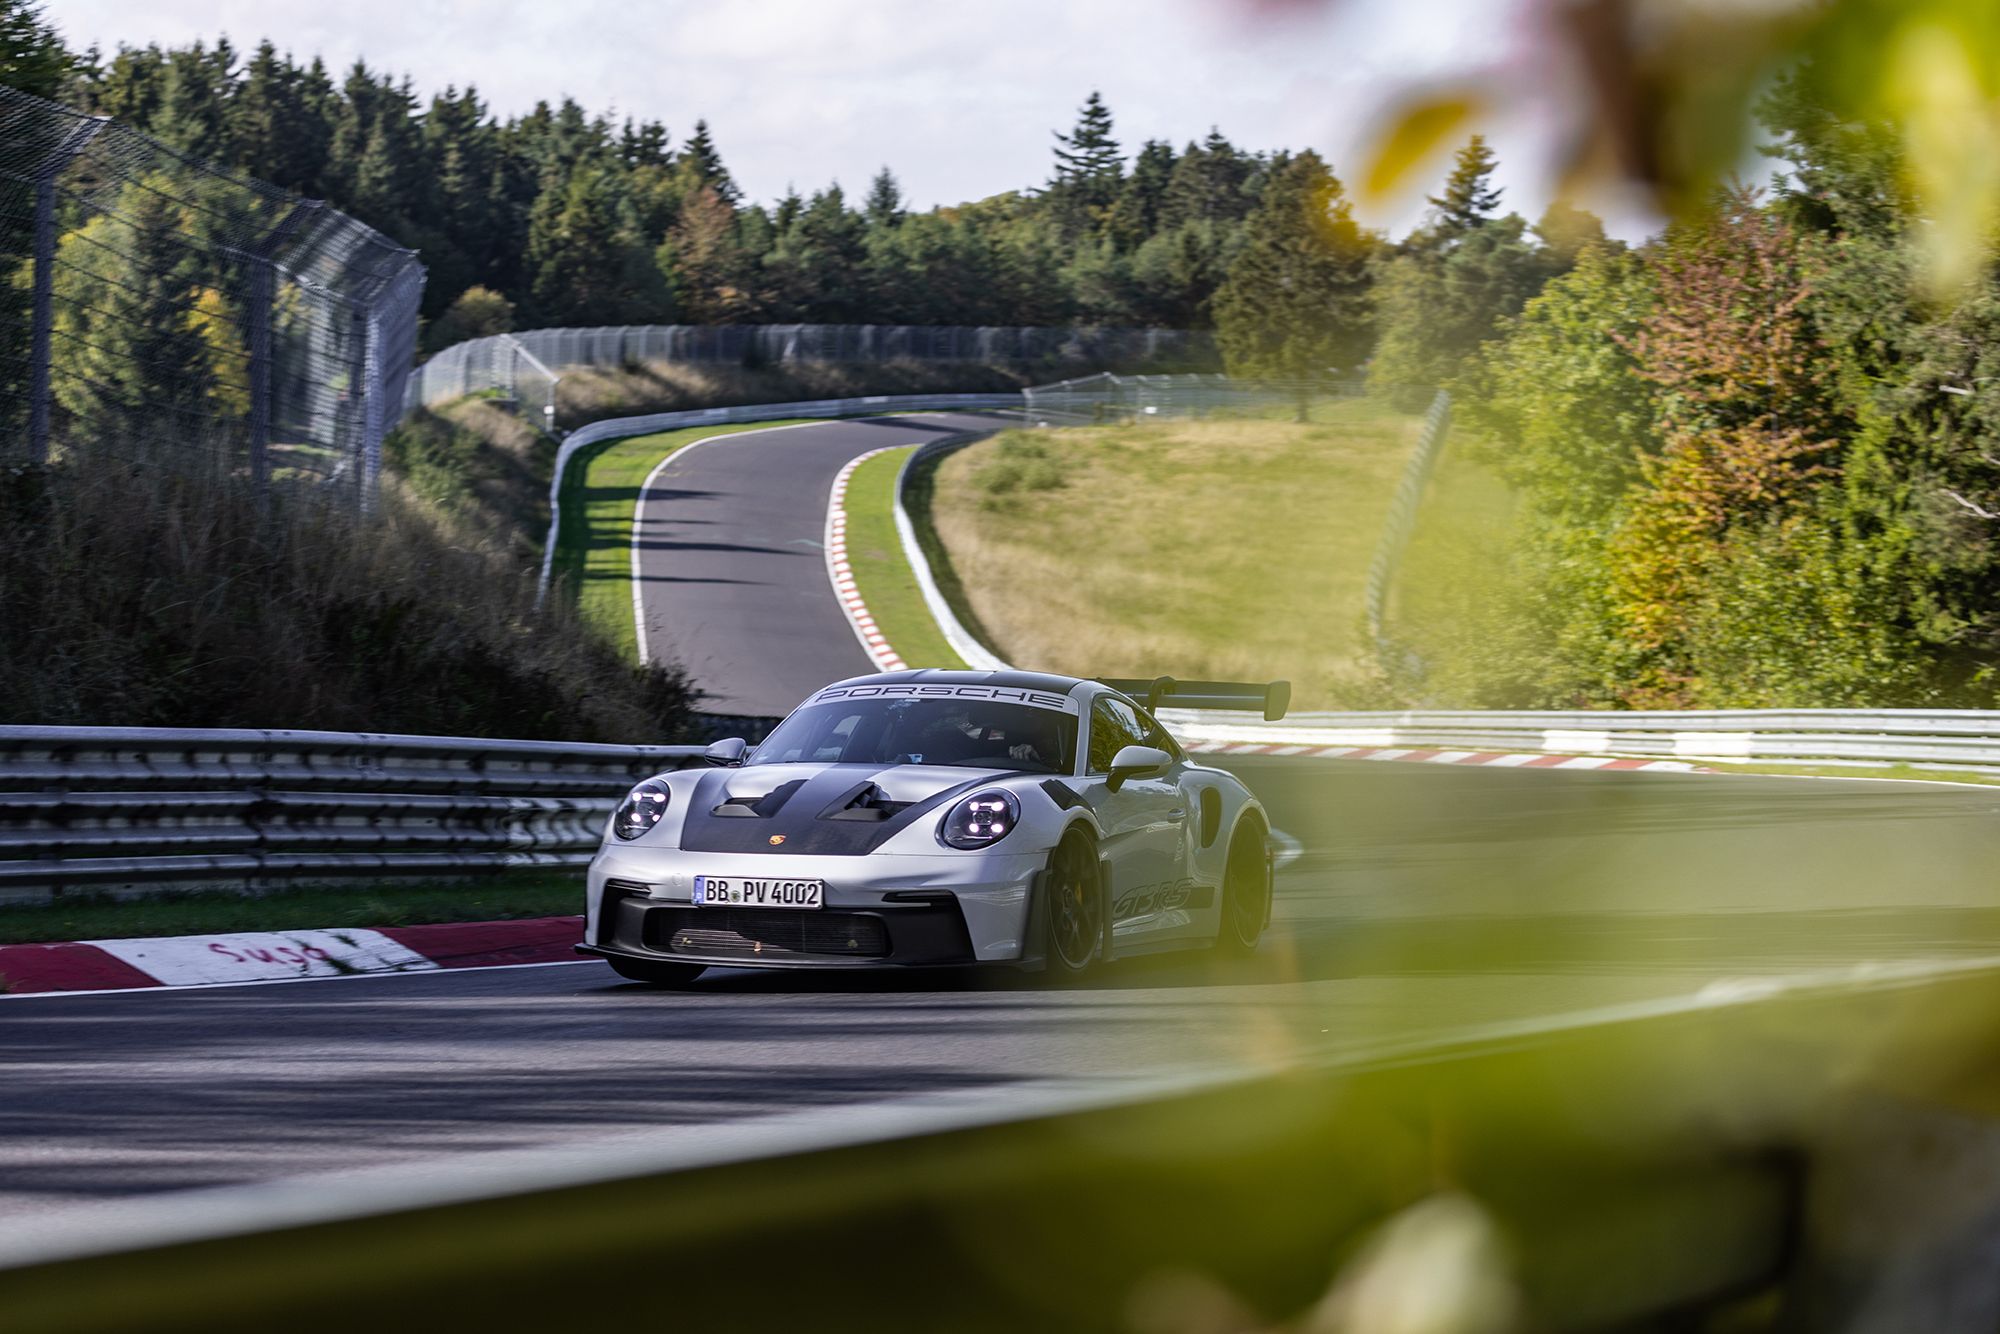 Porsche Taycan GT Seems Ultra Fast Testing For Nürburgring Lap Record